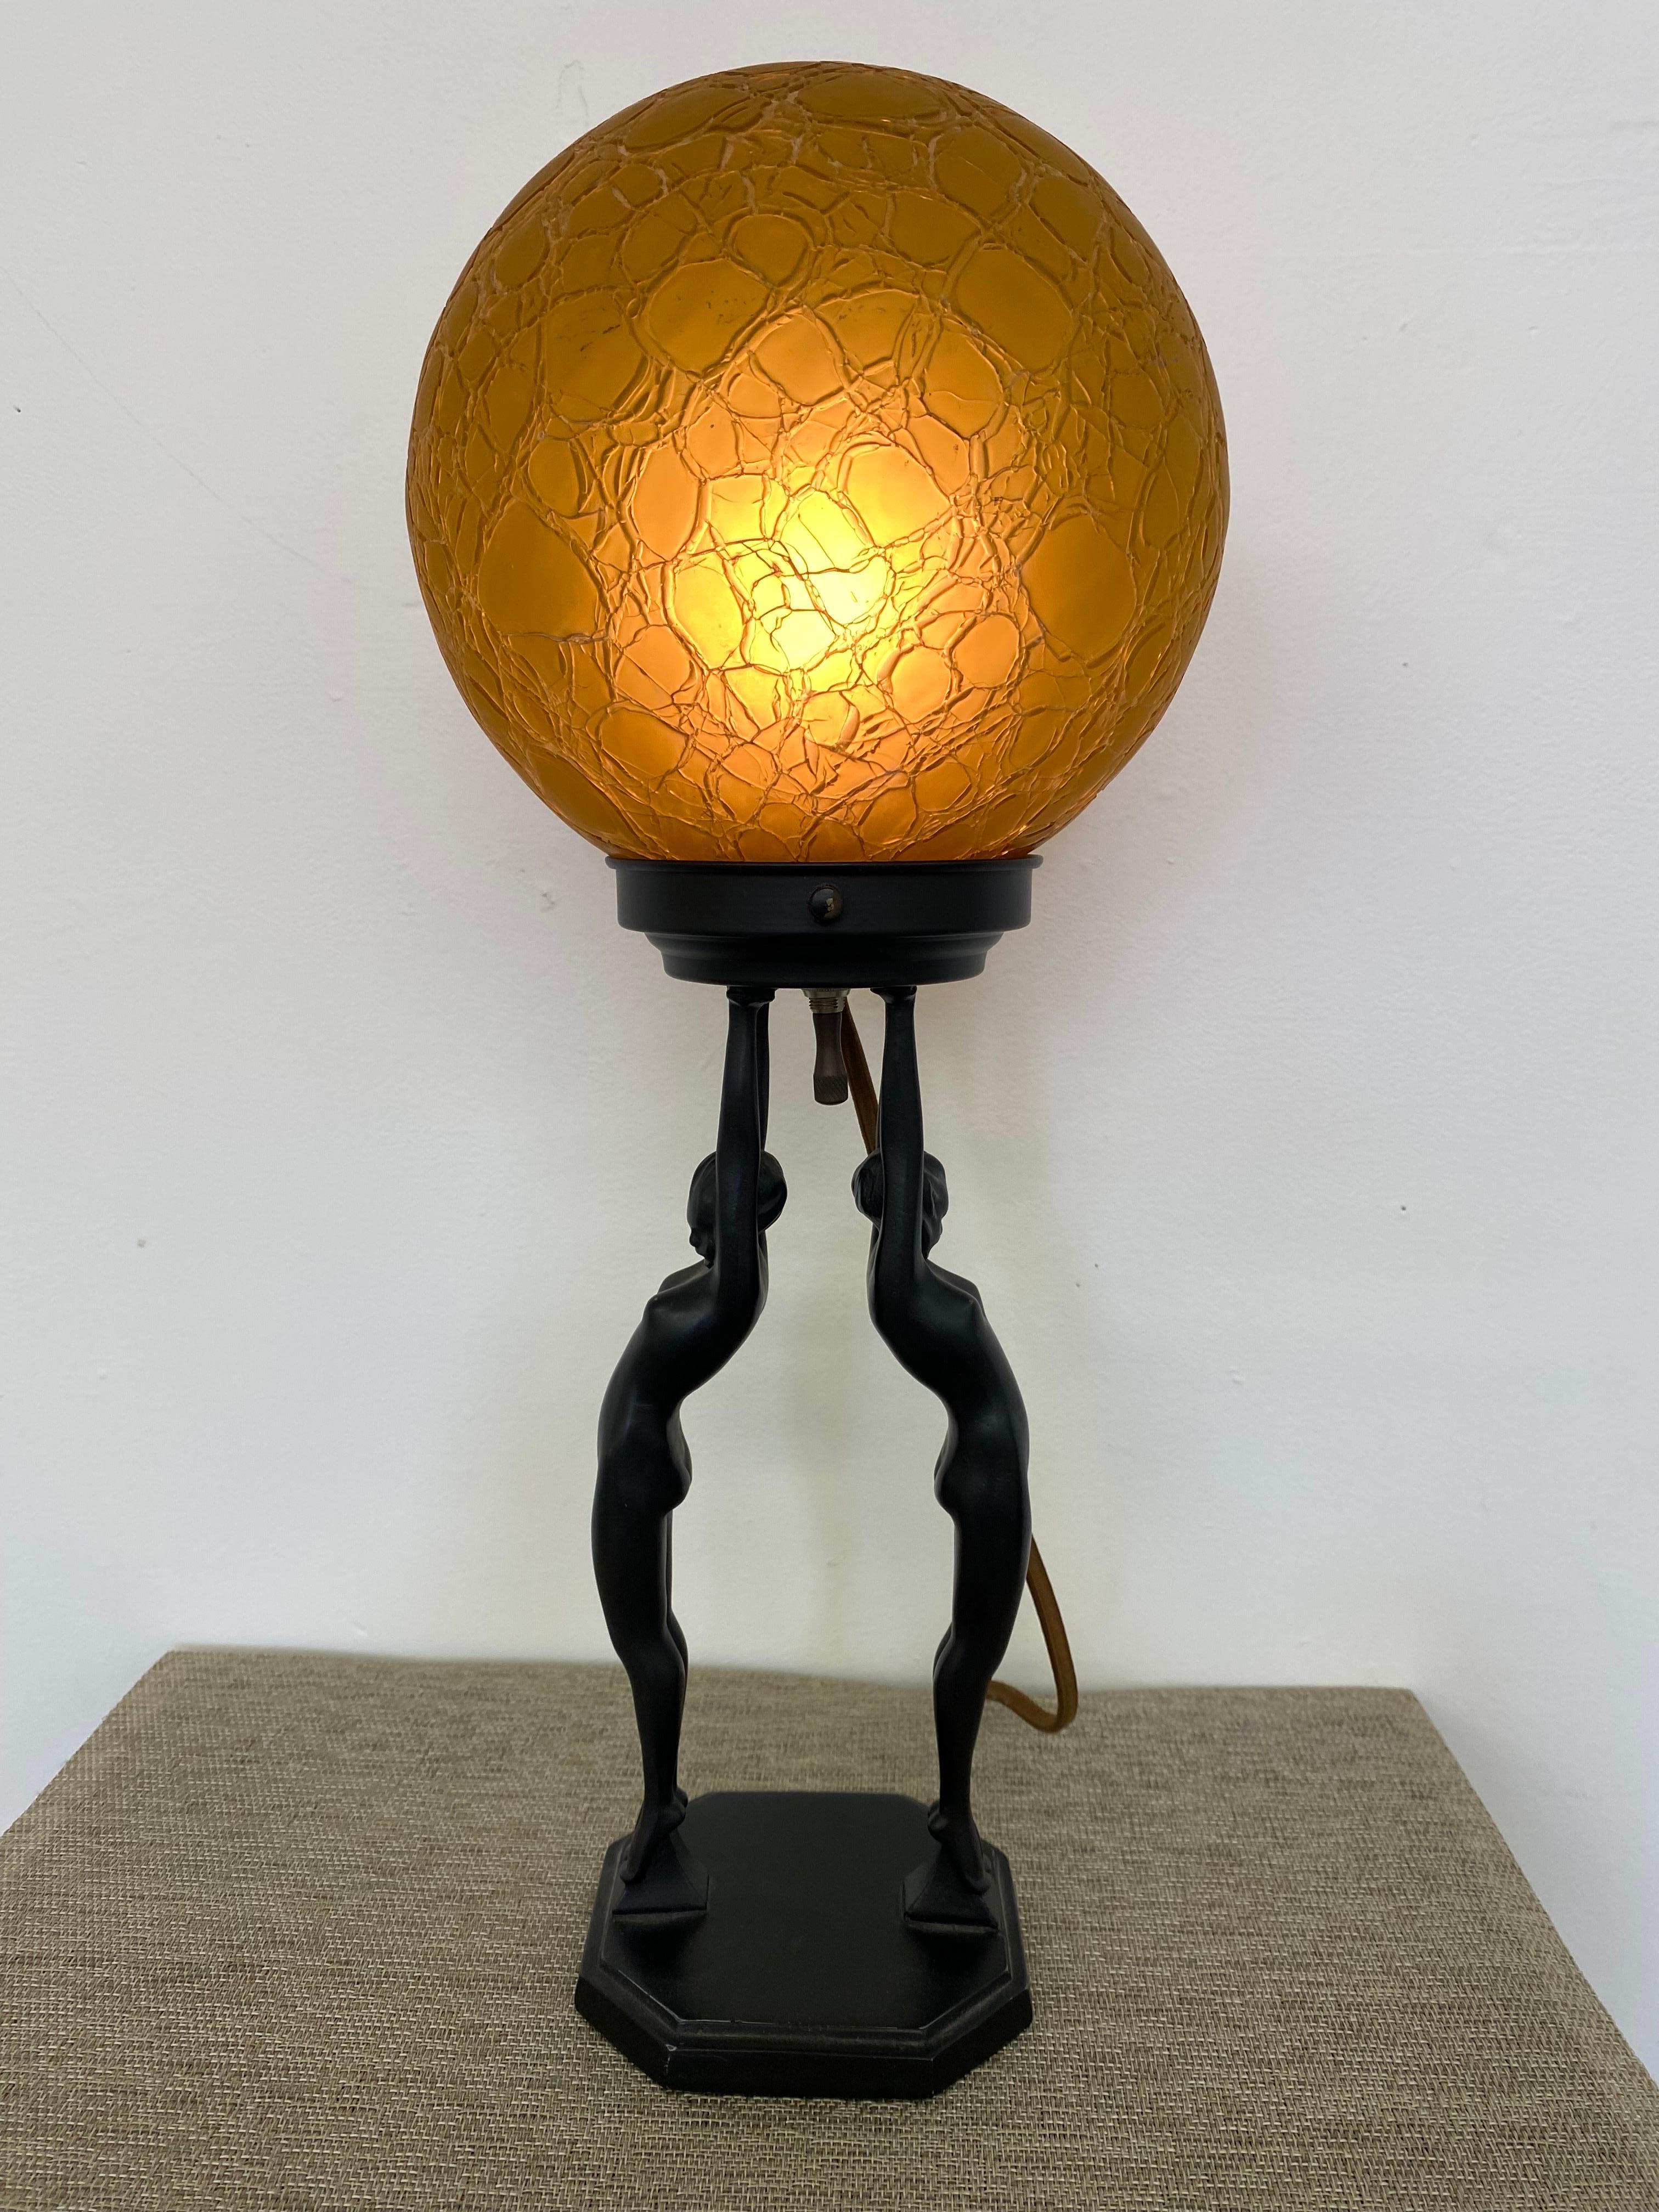 Frankart Lady Lamp, model L211.  Two nudes hold aloft an amber Round Globe.  Center Switch under metal Dish.  2 other globe options are available and appropriate for the Fixture.  Please specify your choice.  Only 1 globe is available with lamp.

